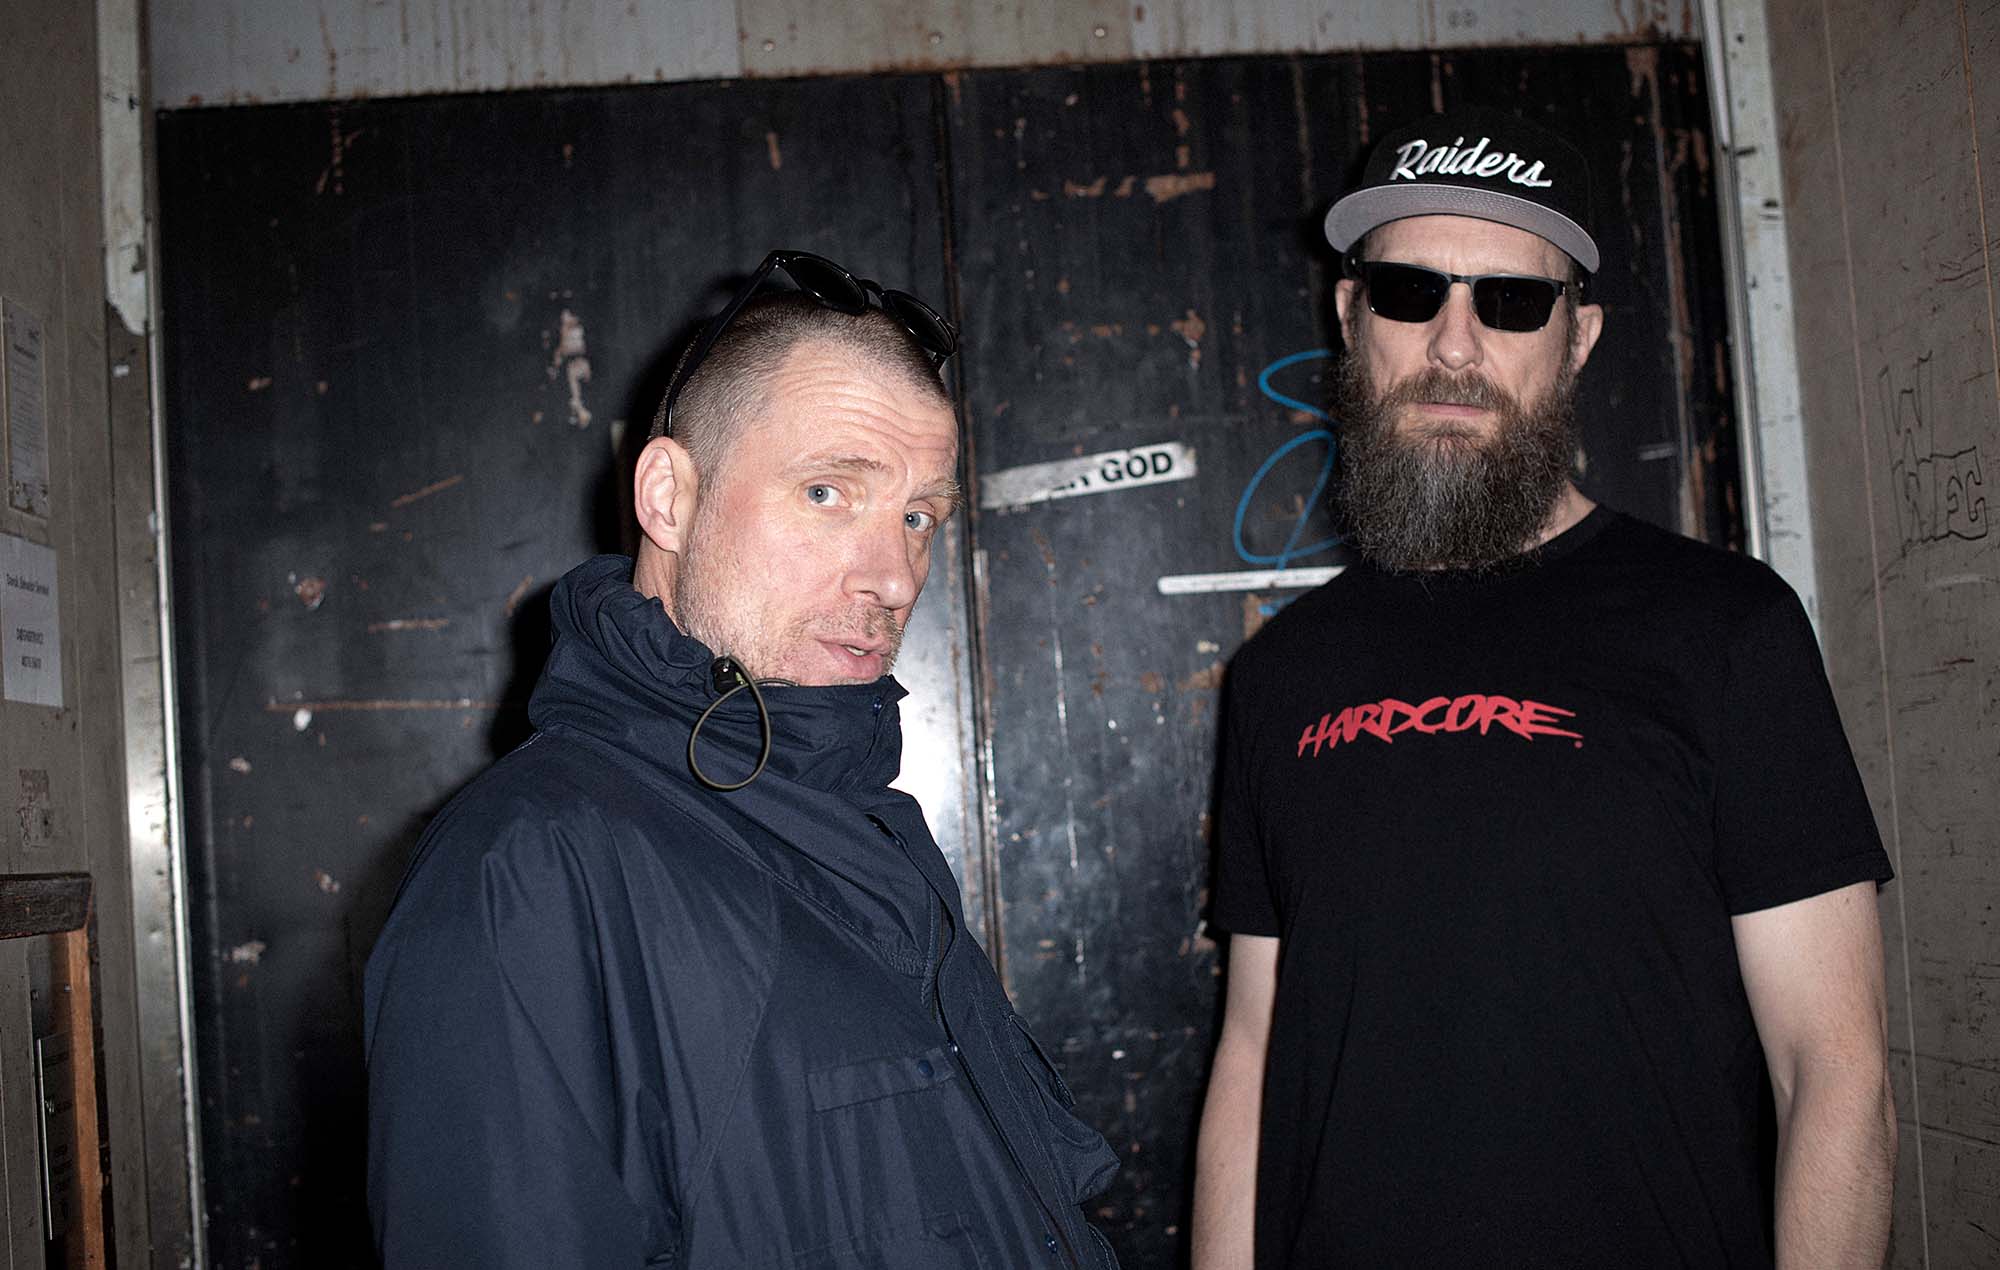 Sleaford Mods’ Jason Williamson says he had “a bit of a crisis” about his age when live music came back